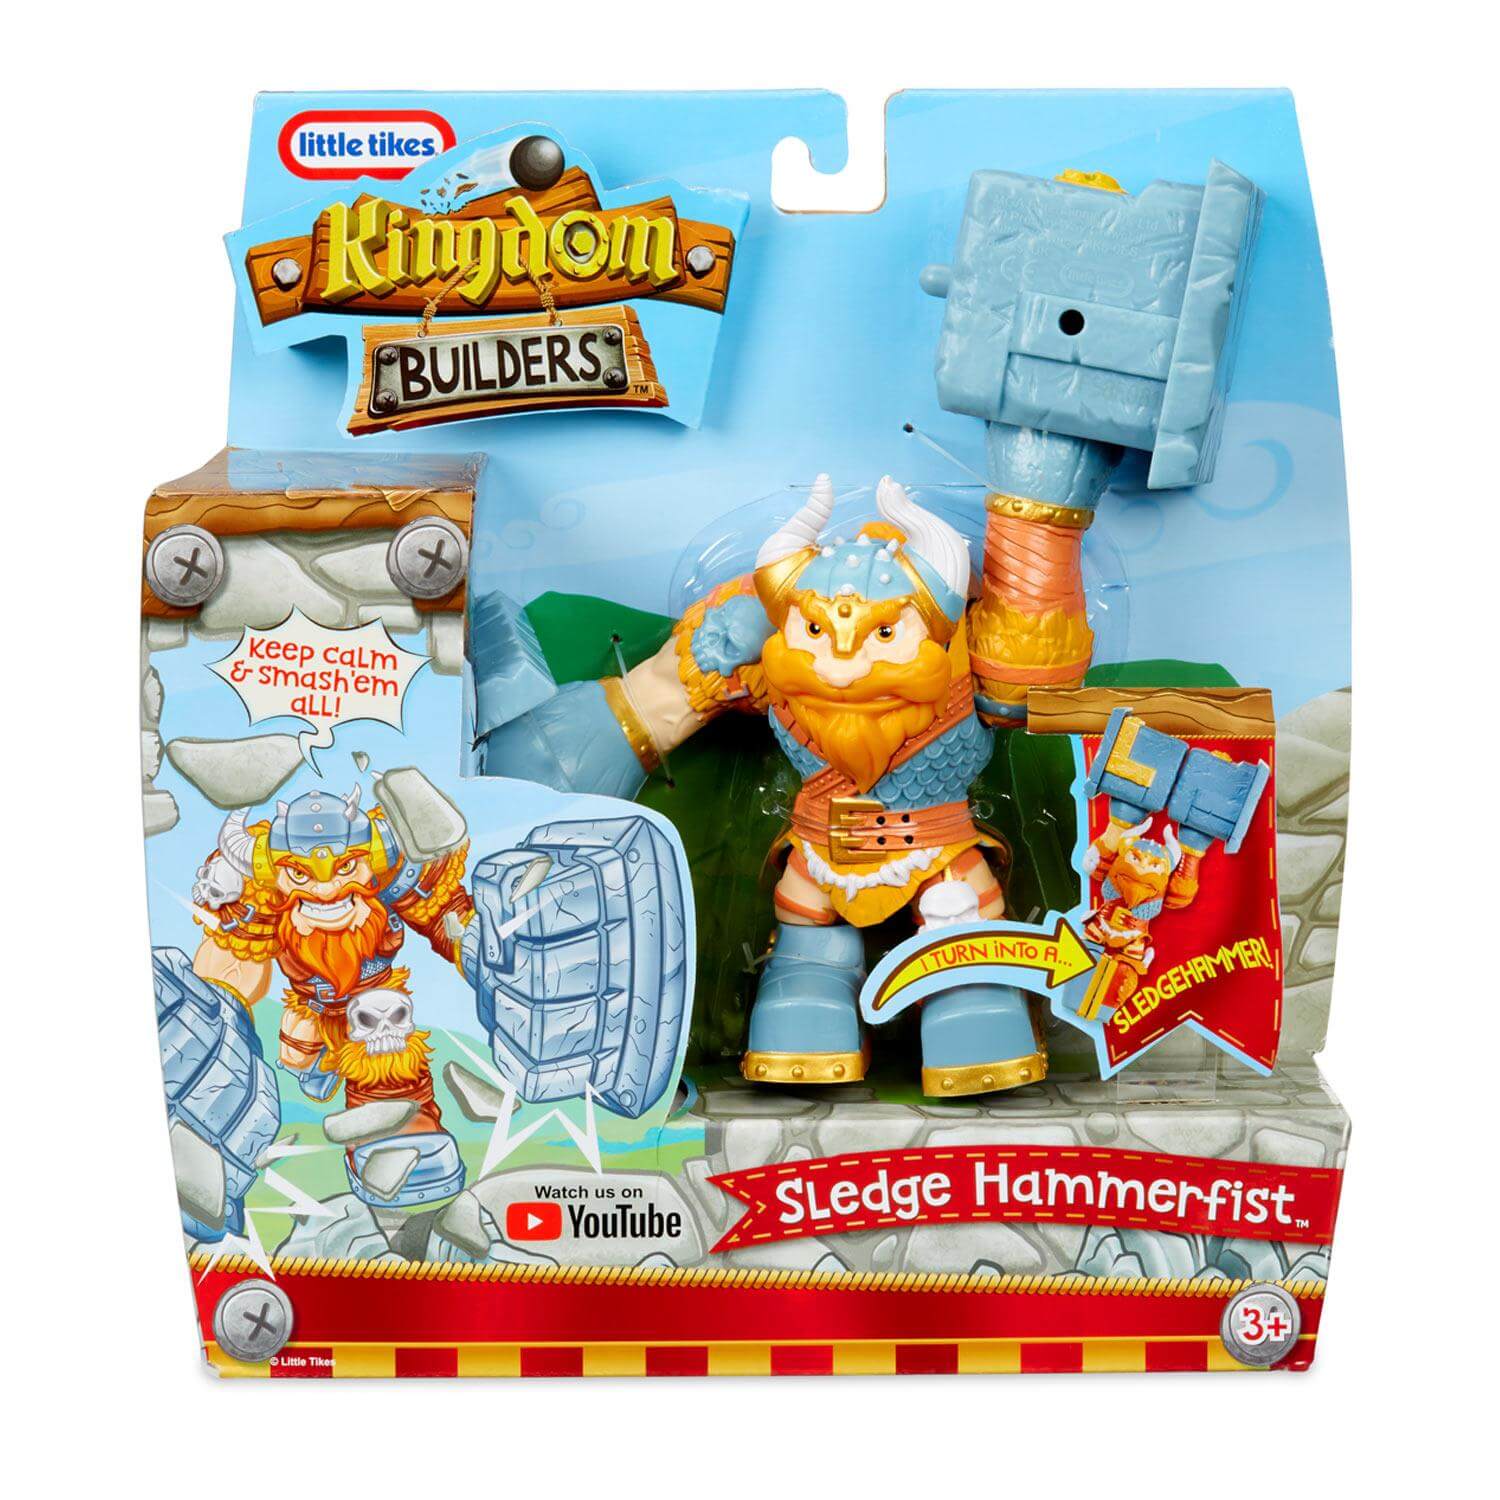 Front view of the Kingdom Builders Sledge Hammerfist package.